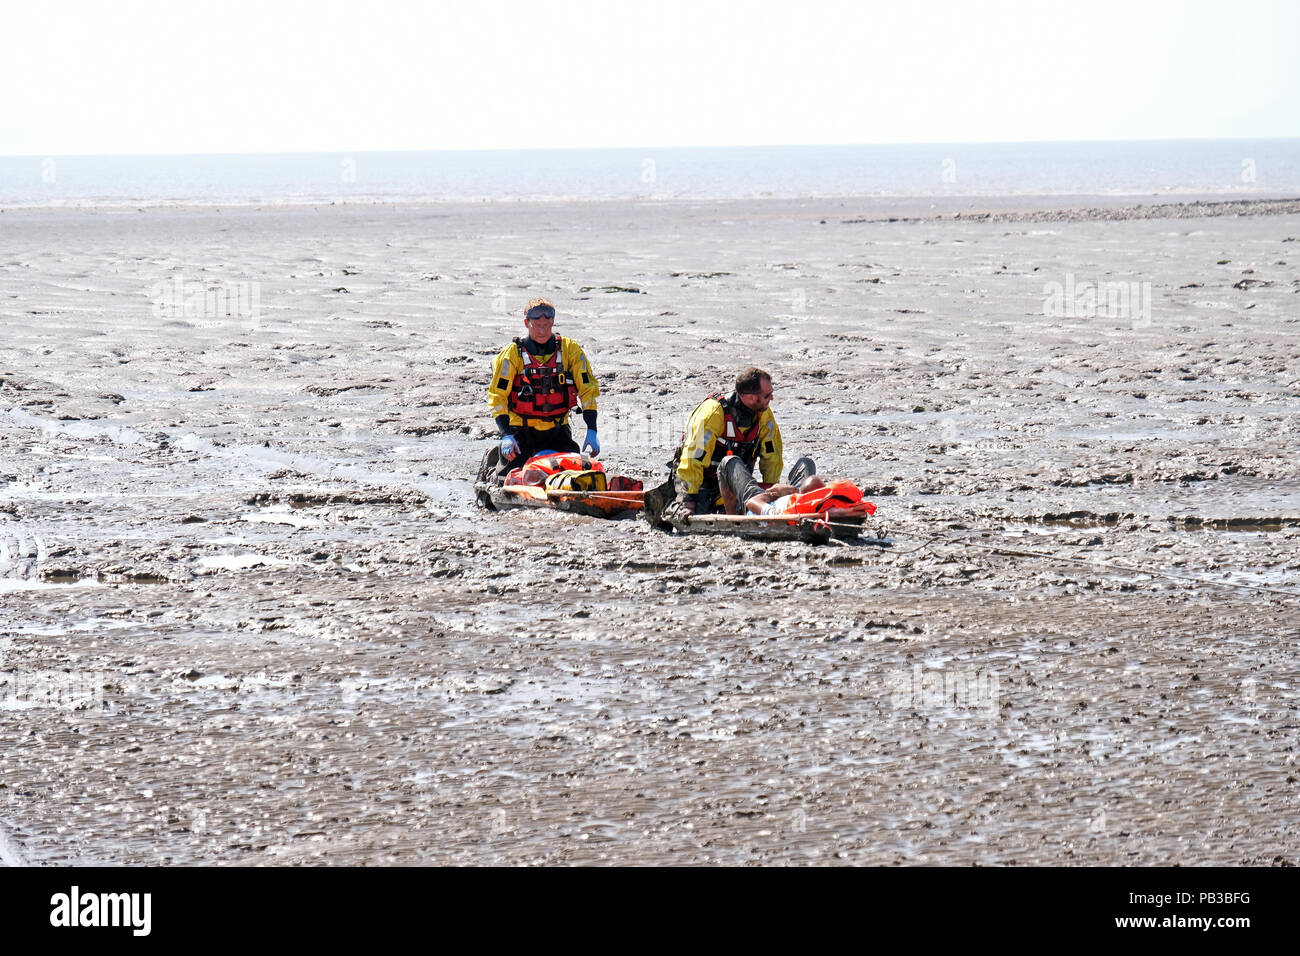 Weston-super-Mare, UK. 26th July, 2018. Coastguards rescue a man who had become trapped on the mud flats below the beach. Weston-super-Mare is situated on the Severn estuary, which has the second-highest tidal range in the world, and people often become trapped in the large areas of dangerous soft mud which are exposed at low tide. Keith Ramsey/Alamy Live News Stock Photo